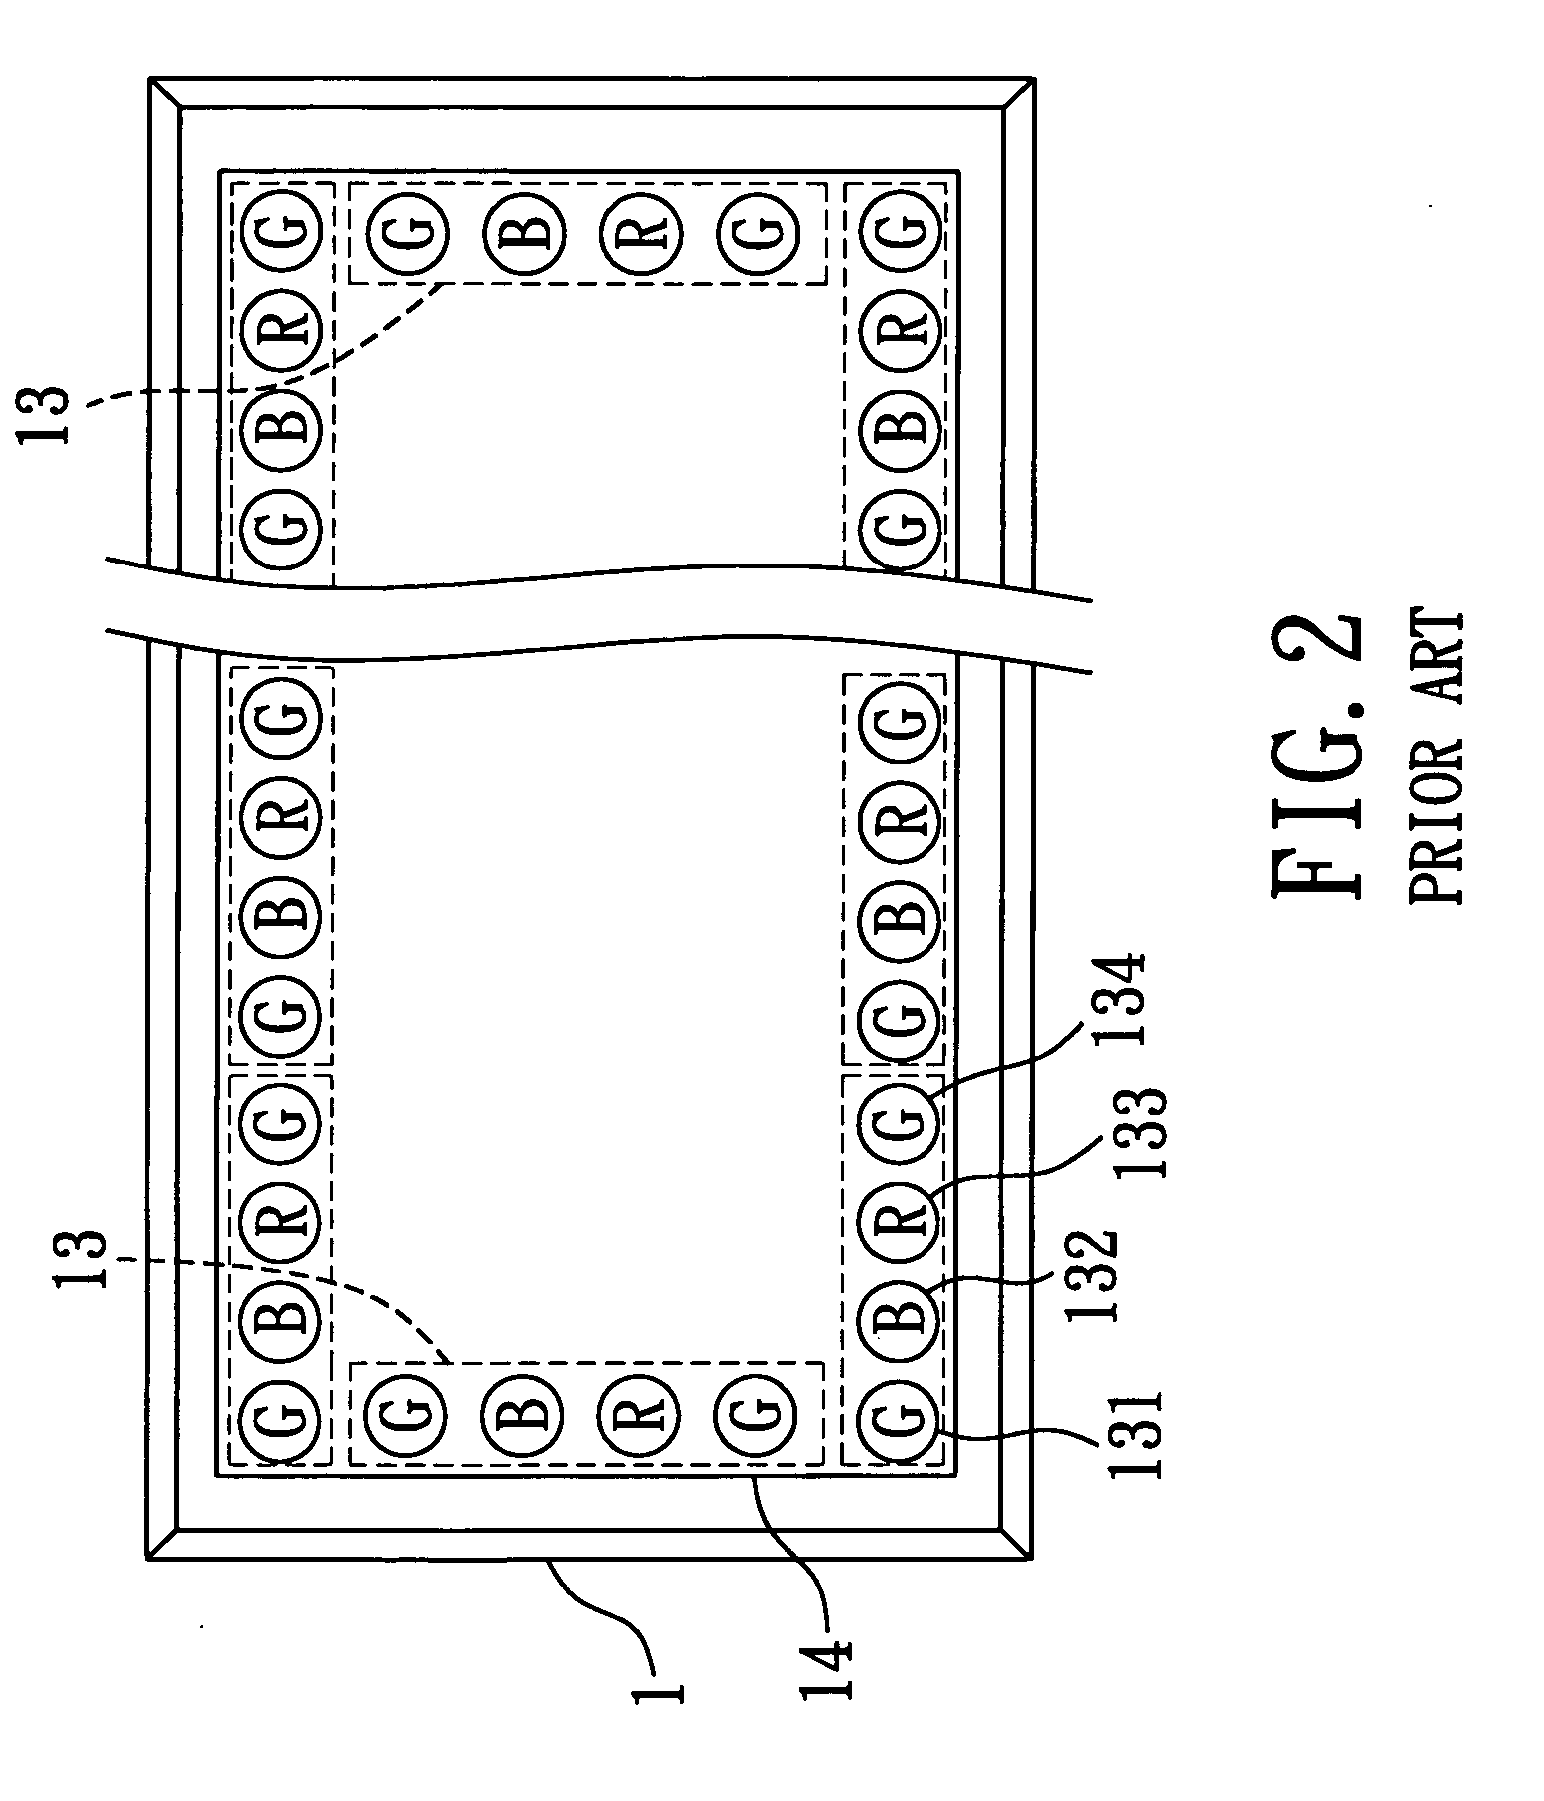 White-light emitting device and the use thereof